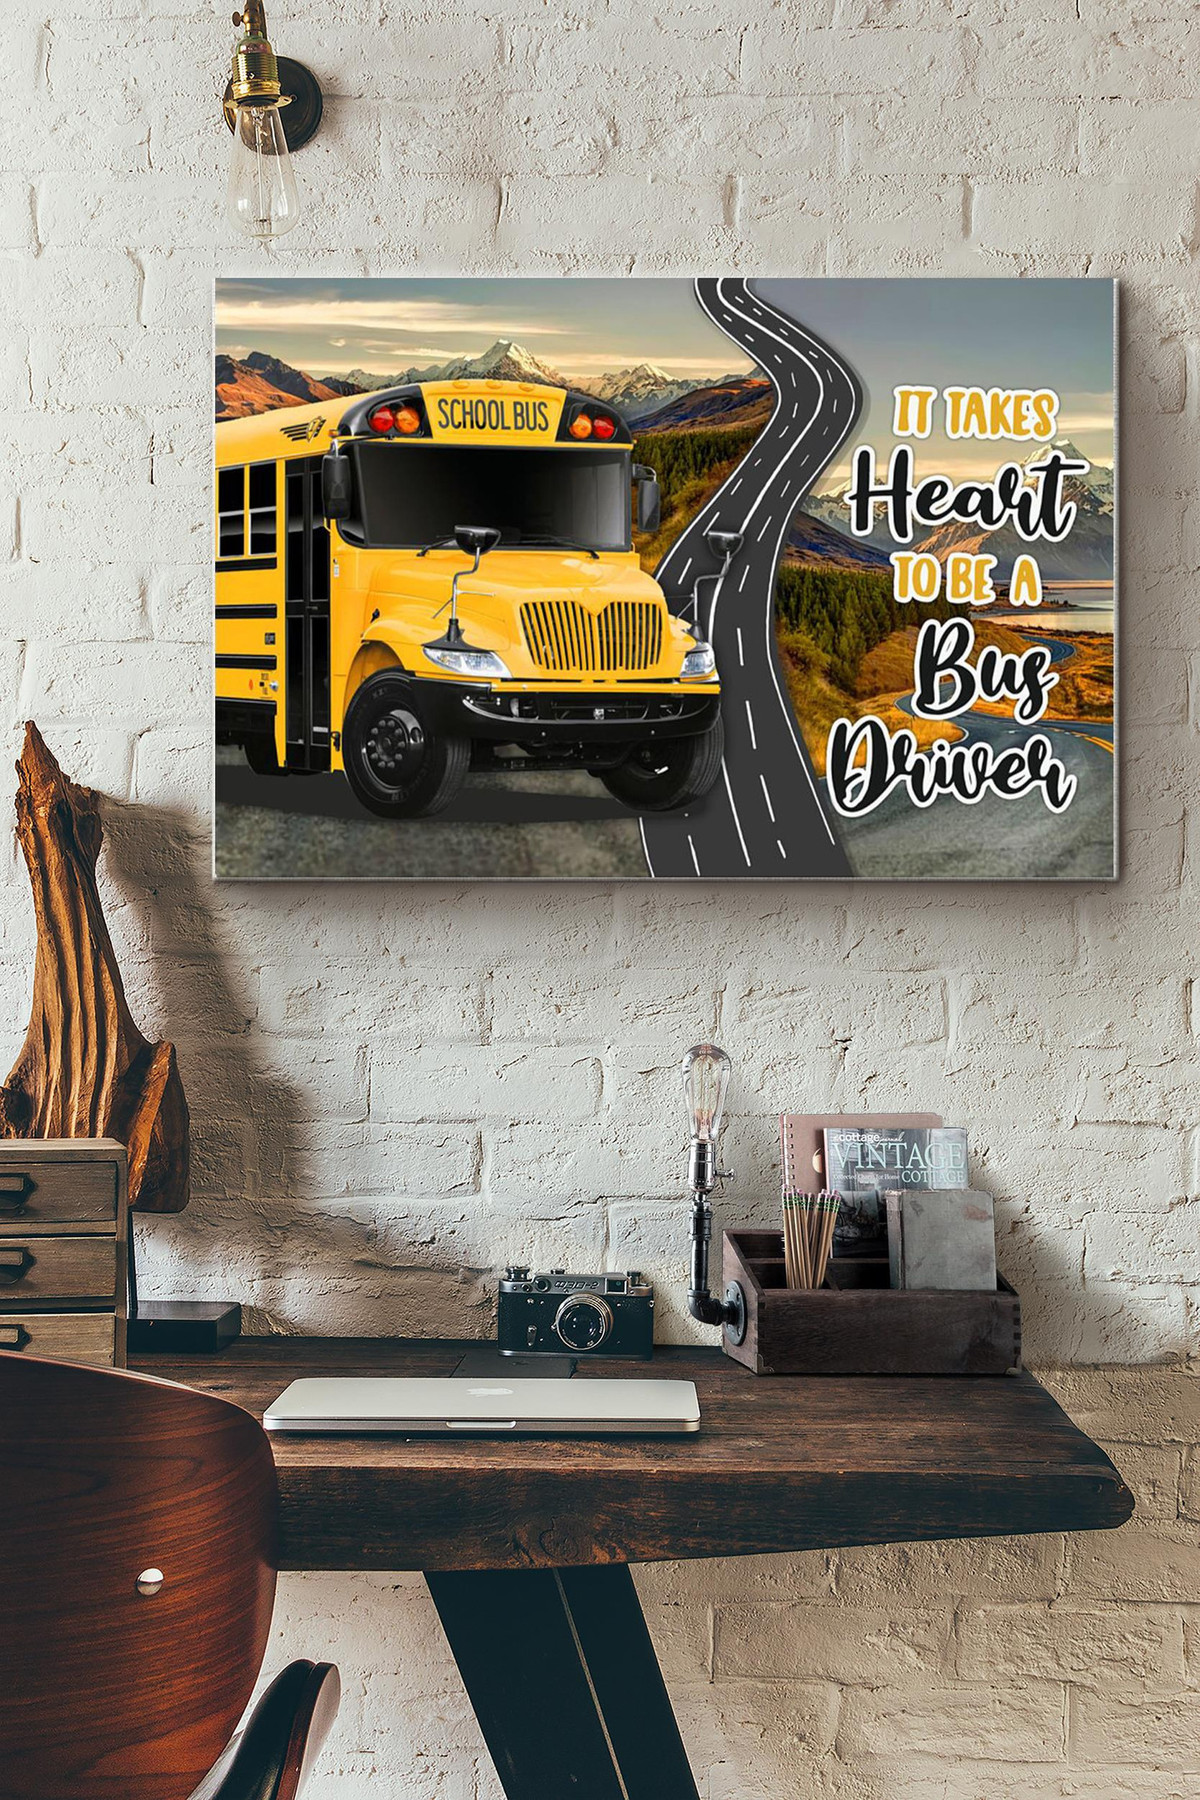 It Takes Heart To Be A Bus Driver Canvas Painting Ideas, Canvas Hanging Prints, Gift Idea Framed Prints, Canvas Paintings Wrapped Canvas 8x10